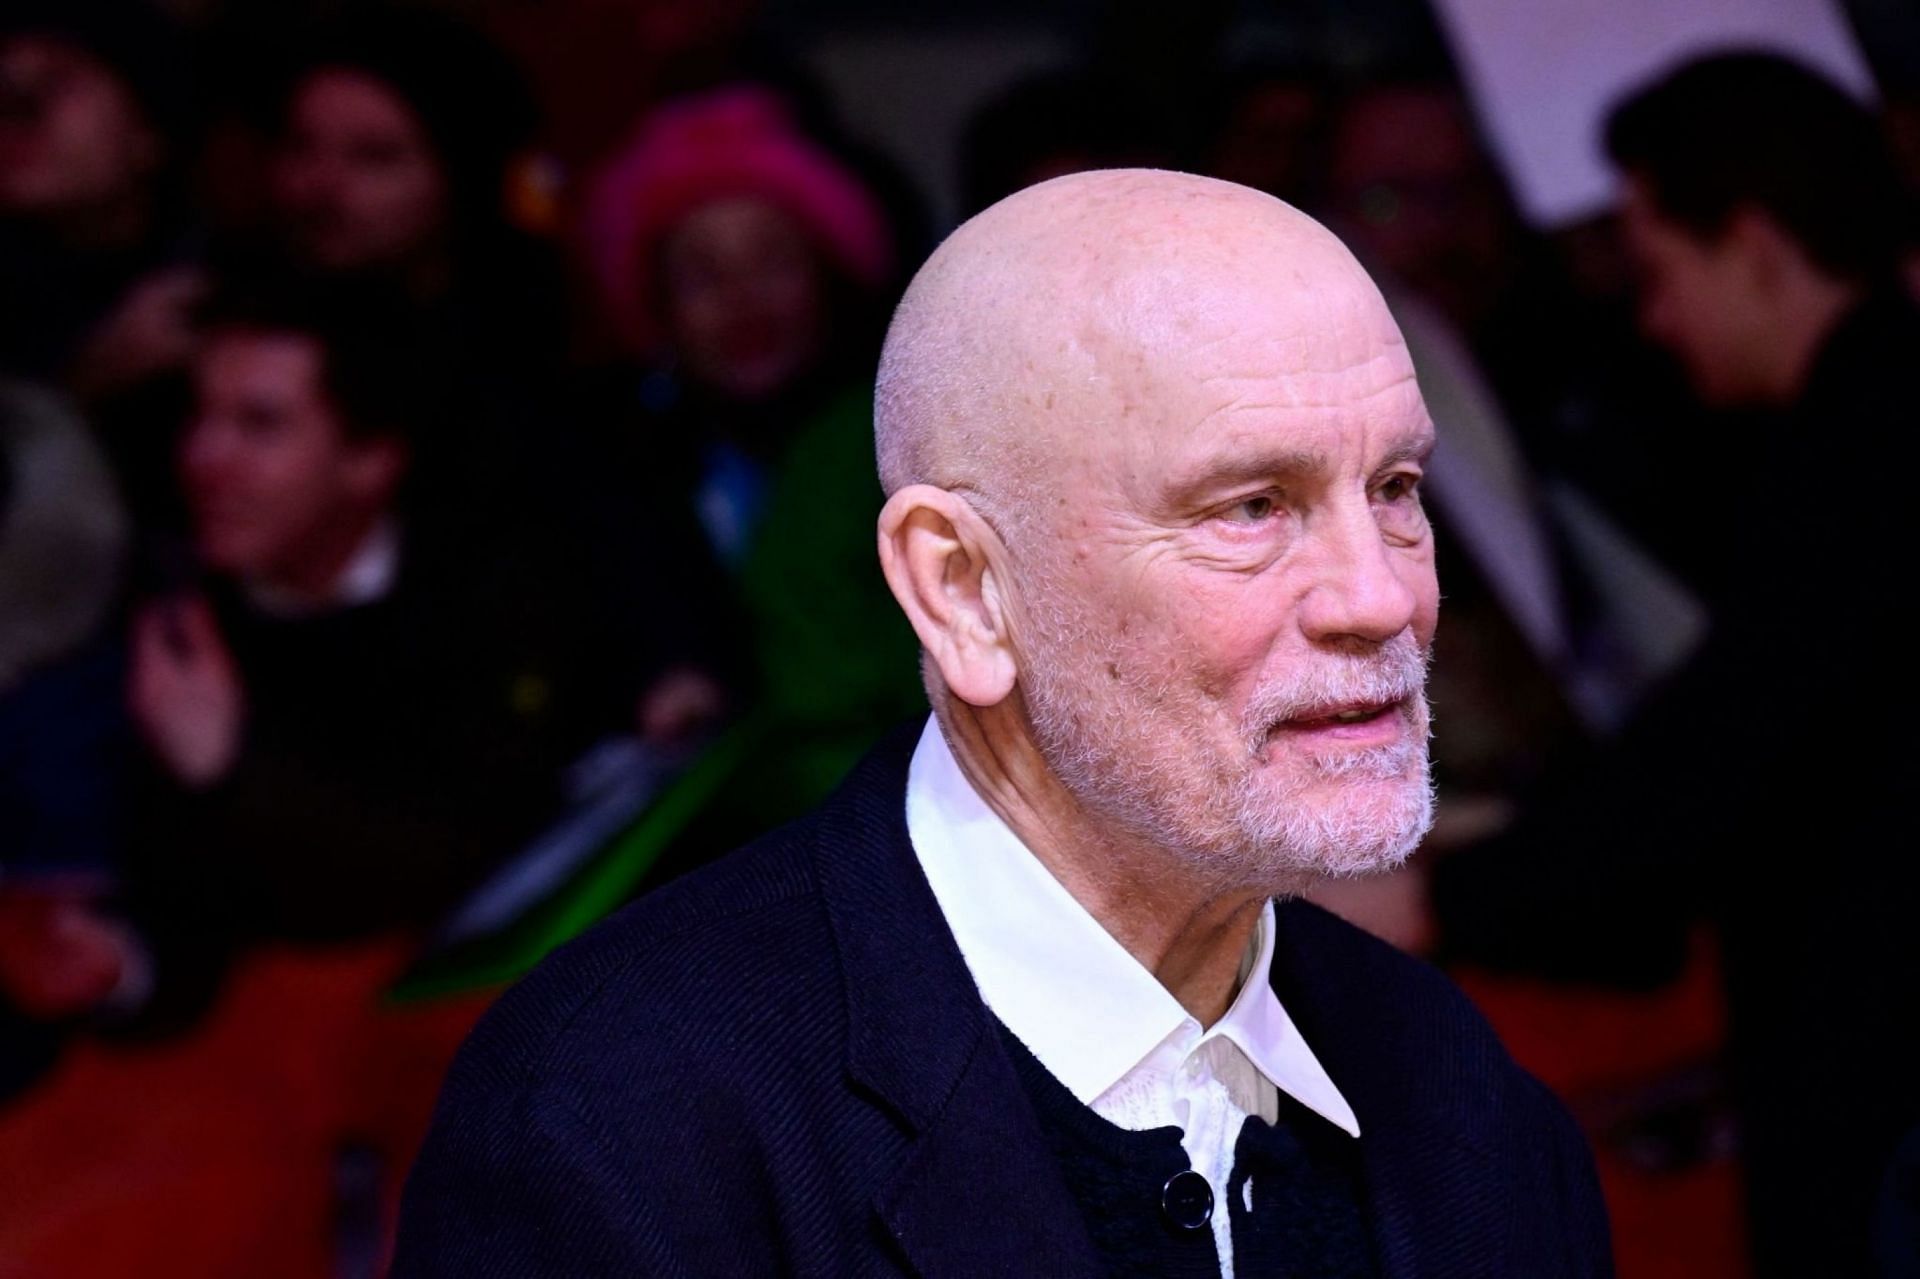  John Malkovich poses on the red carpet for the film 